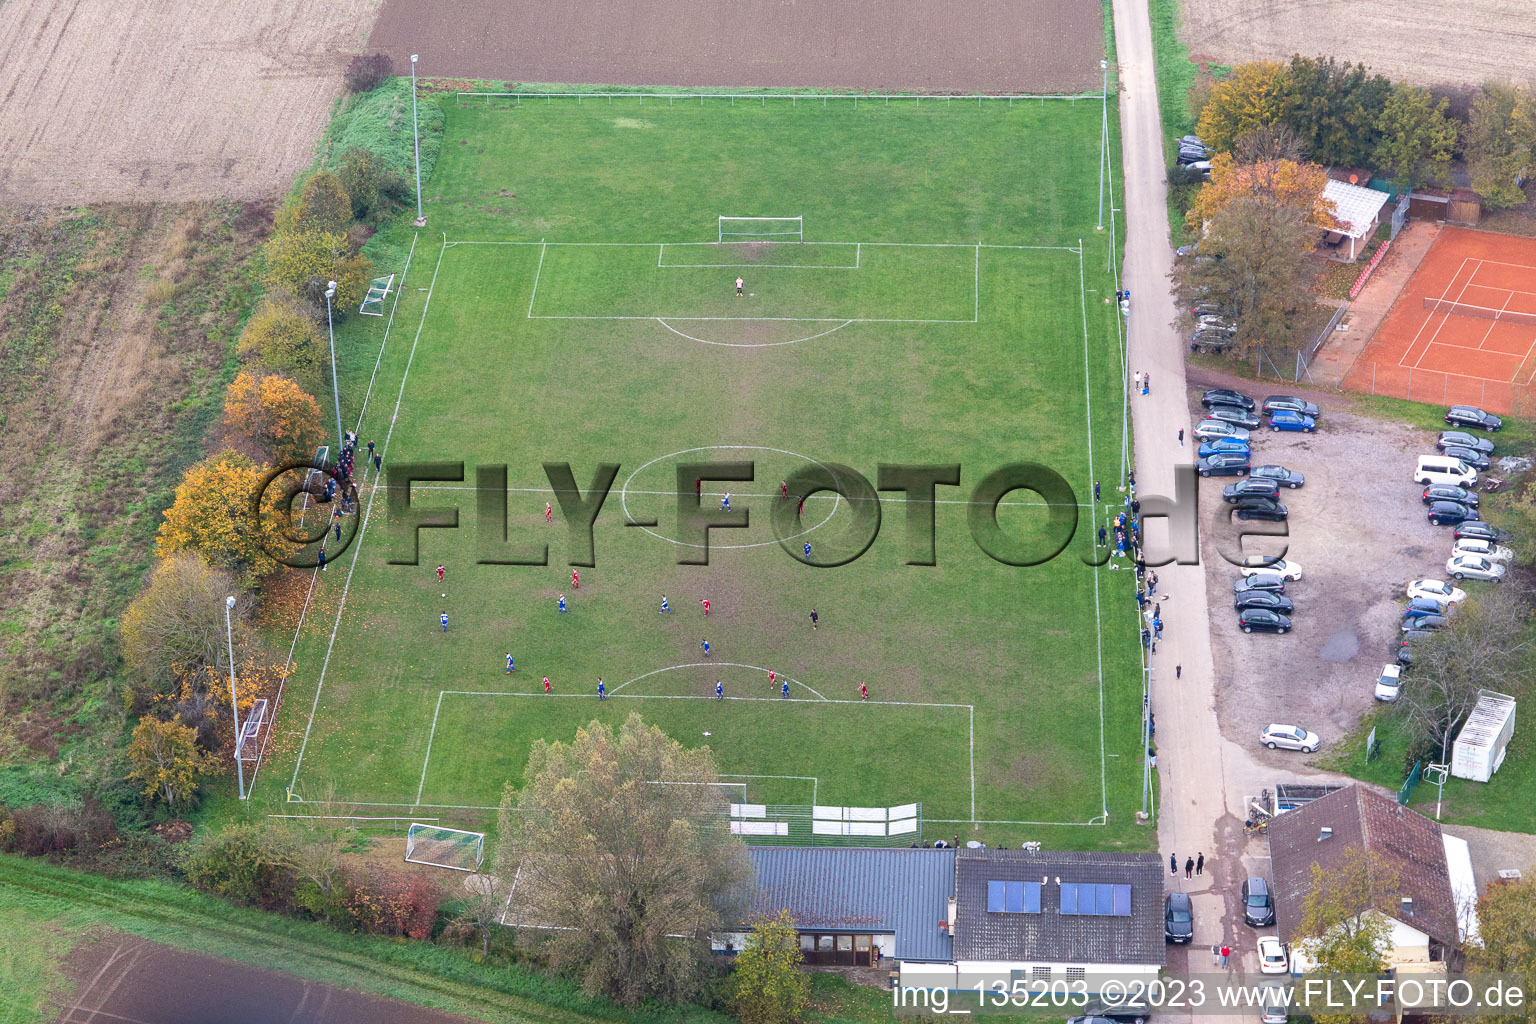 Aerial view of SV 1946 Minfeld in Minfeld in the state Rhineland-Palatinate, Germany